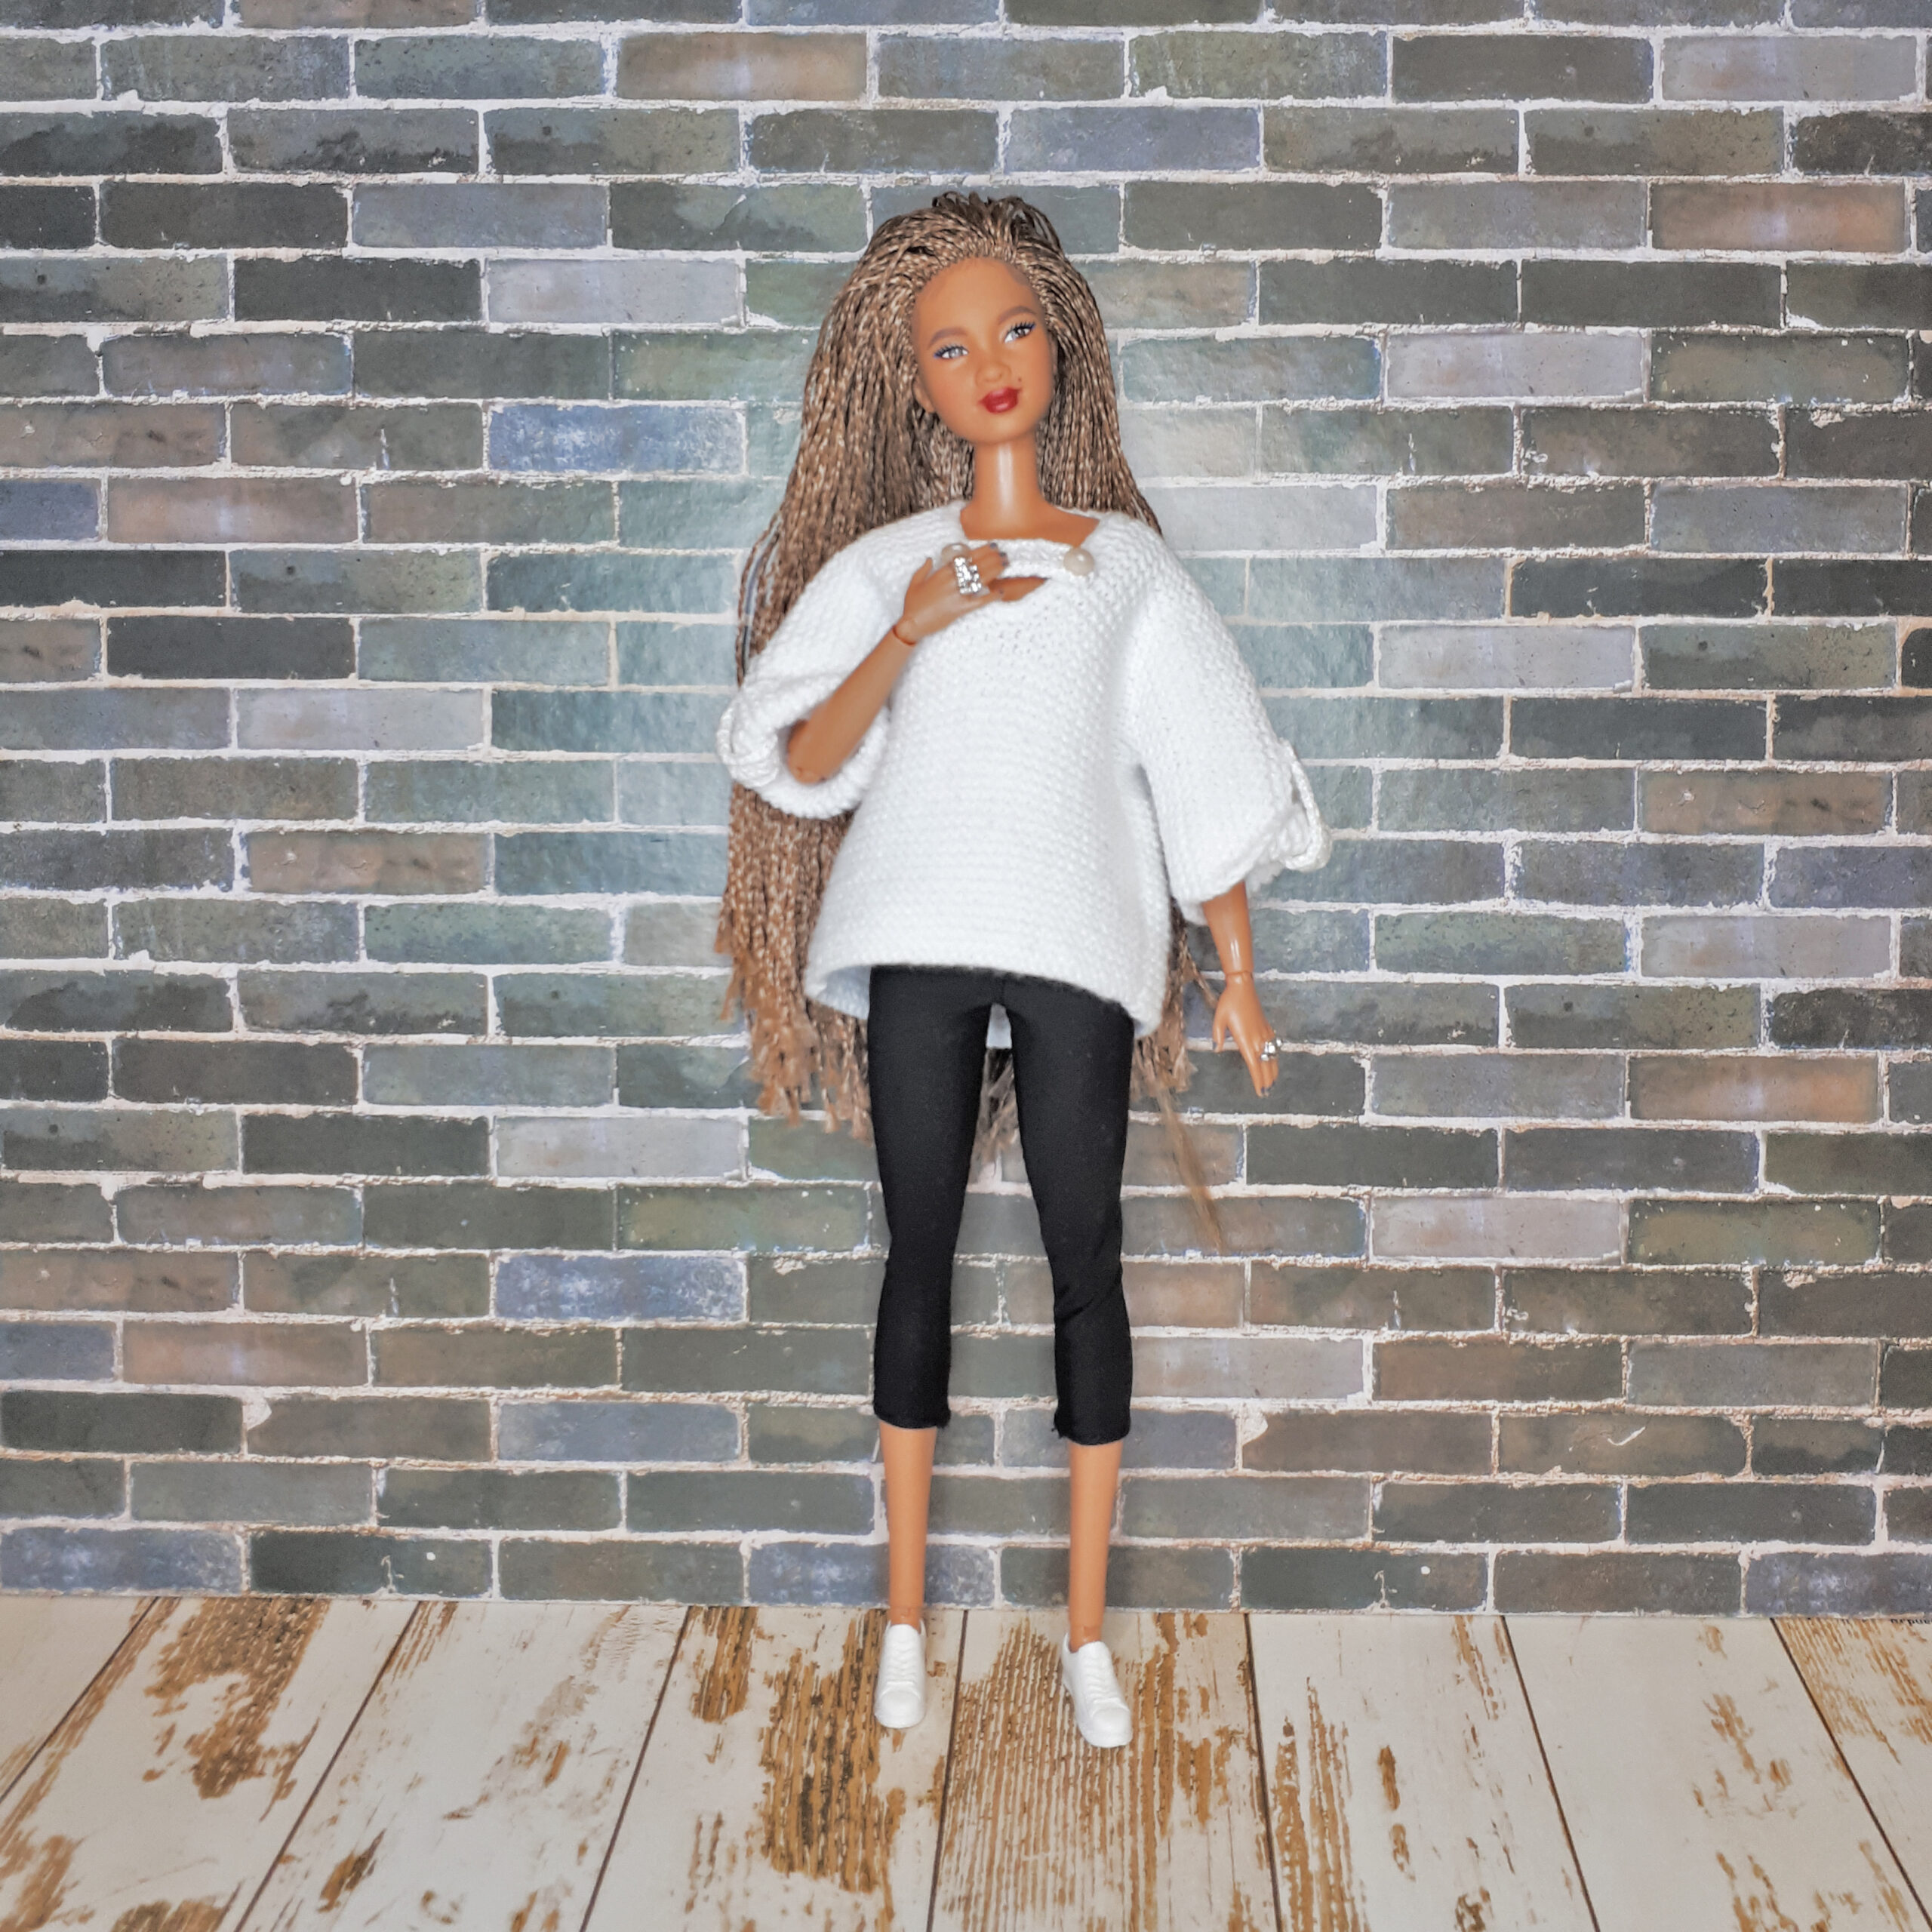 VINTAGE BARBIE WORKIN' Out 1996 Replacement Bottoms Dolls Pink Leggings  £3.00 - PicClick UK